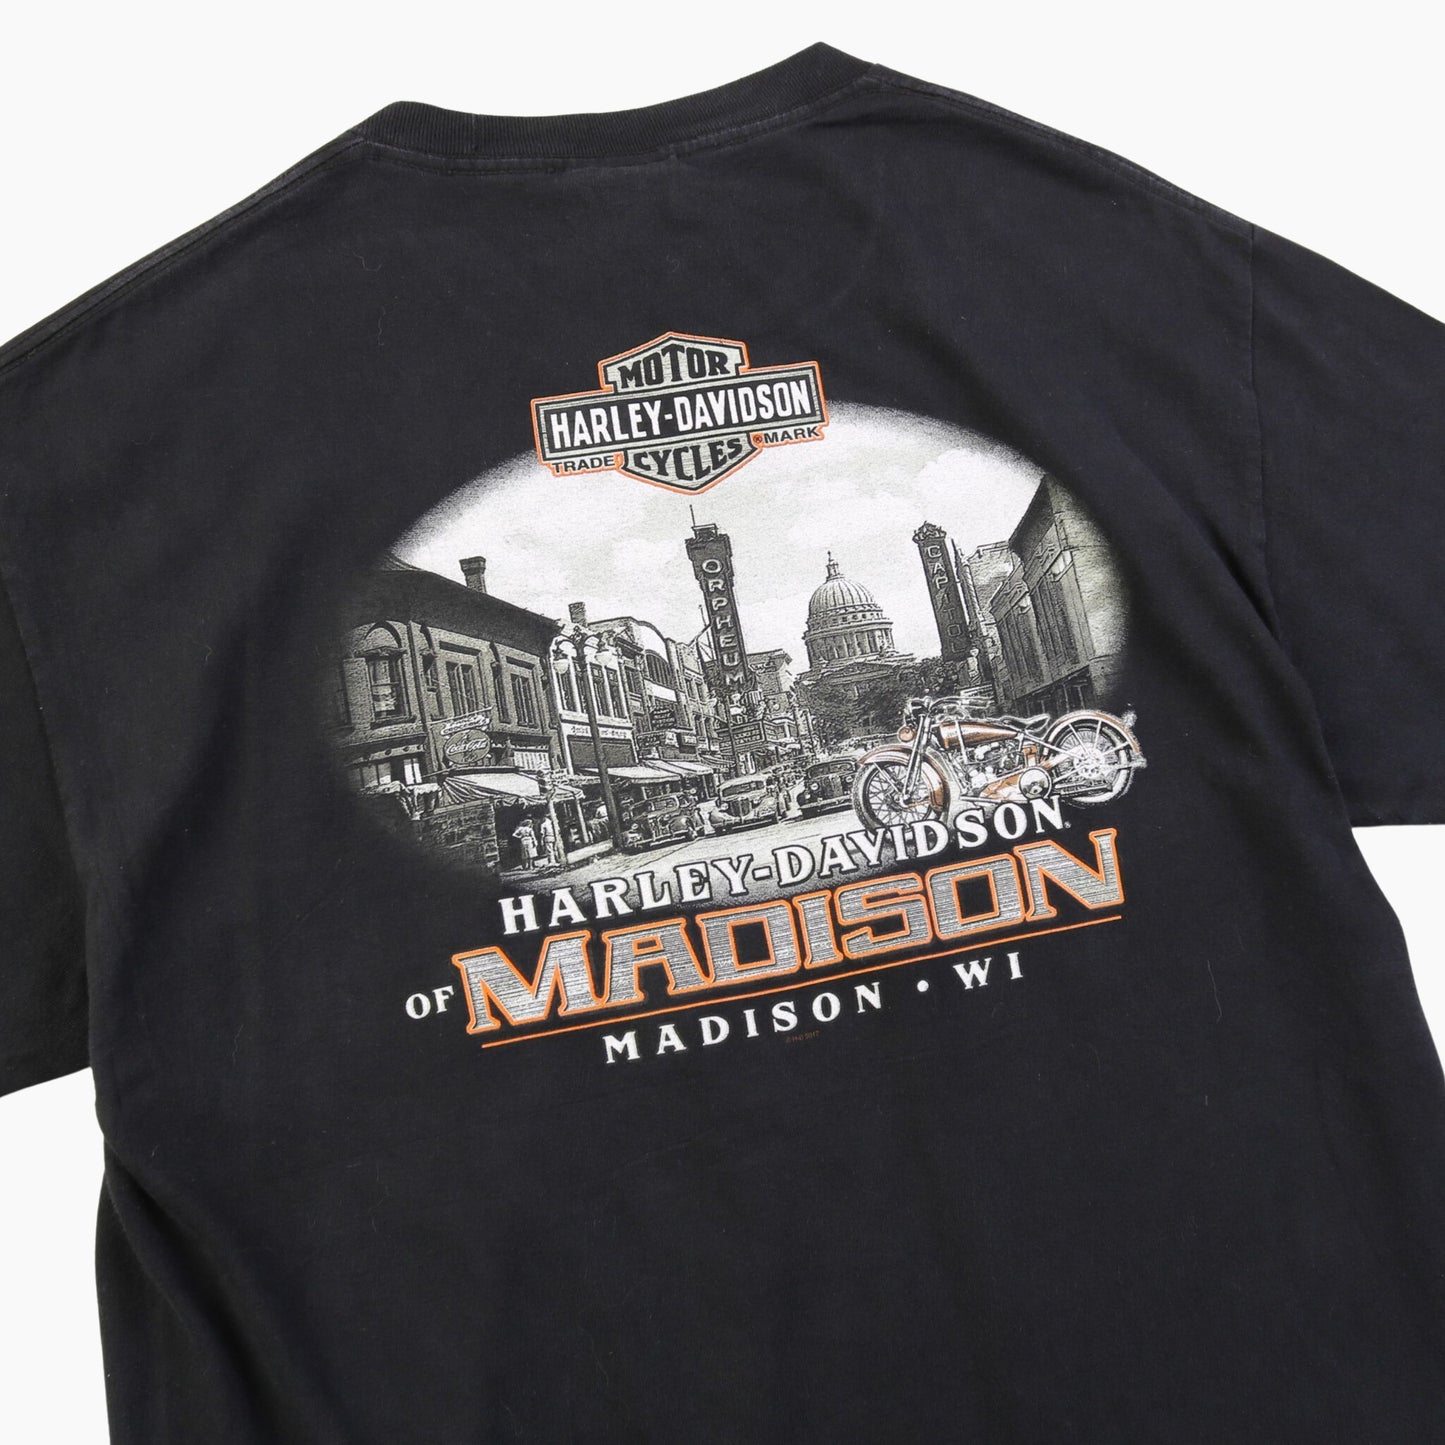 Vintage 'Madison Wisconsin' T-Shirt - American Madness